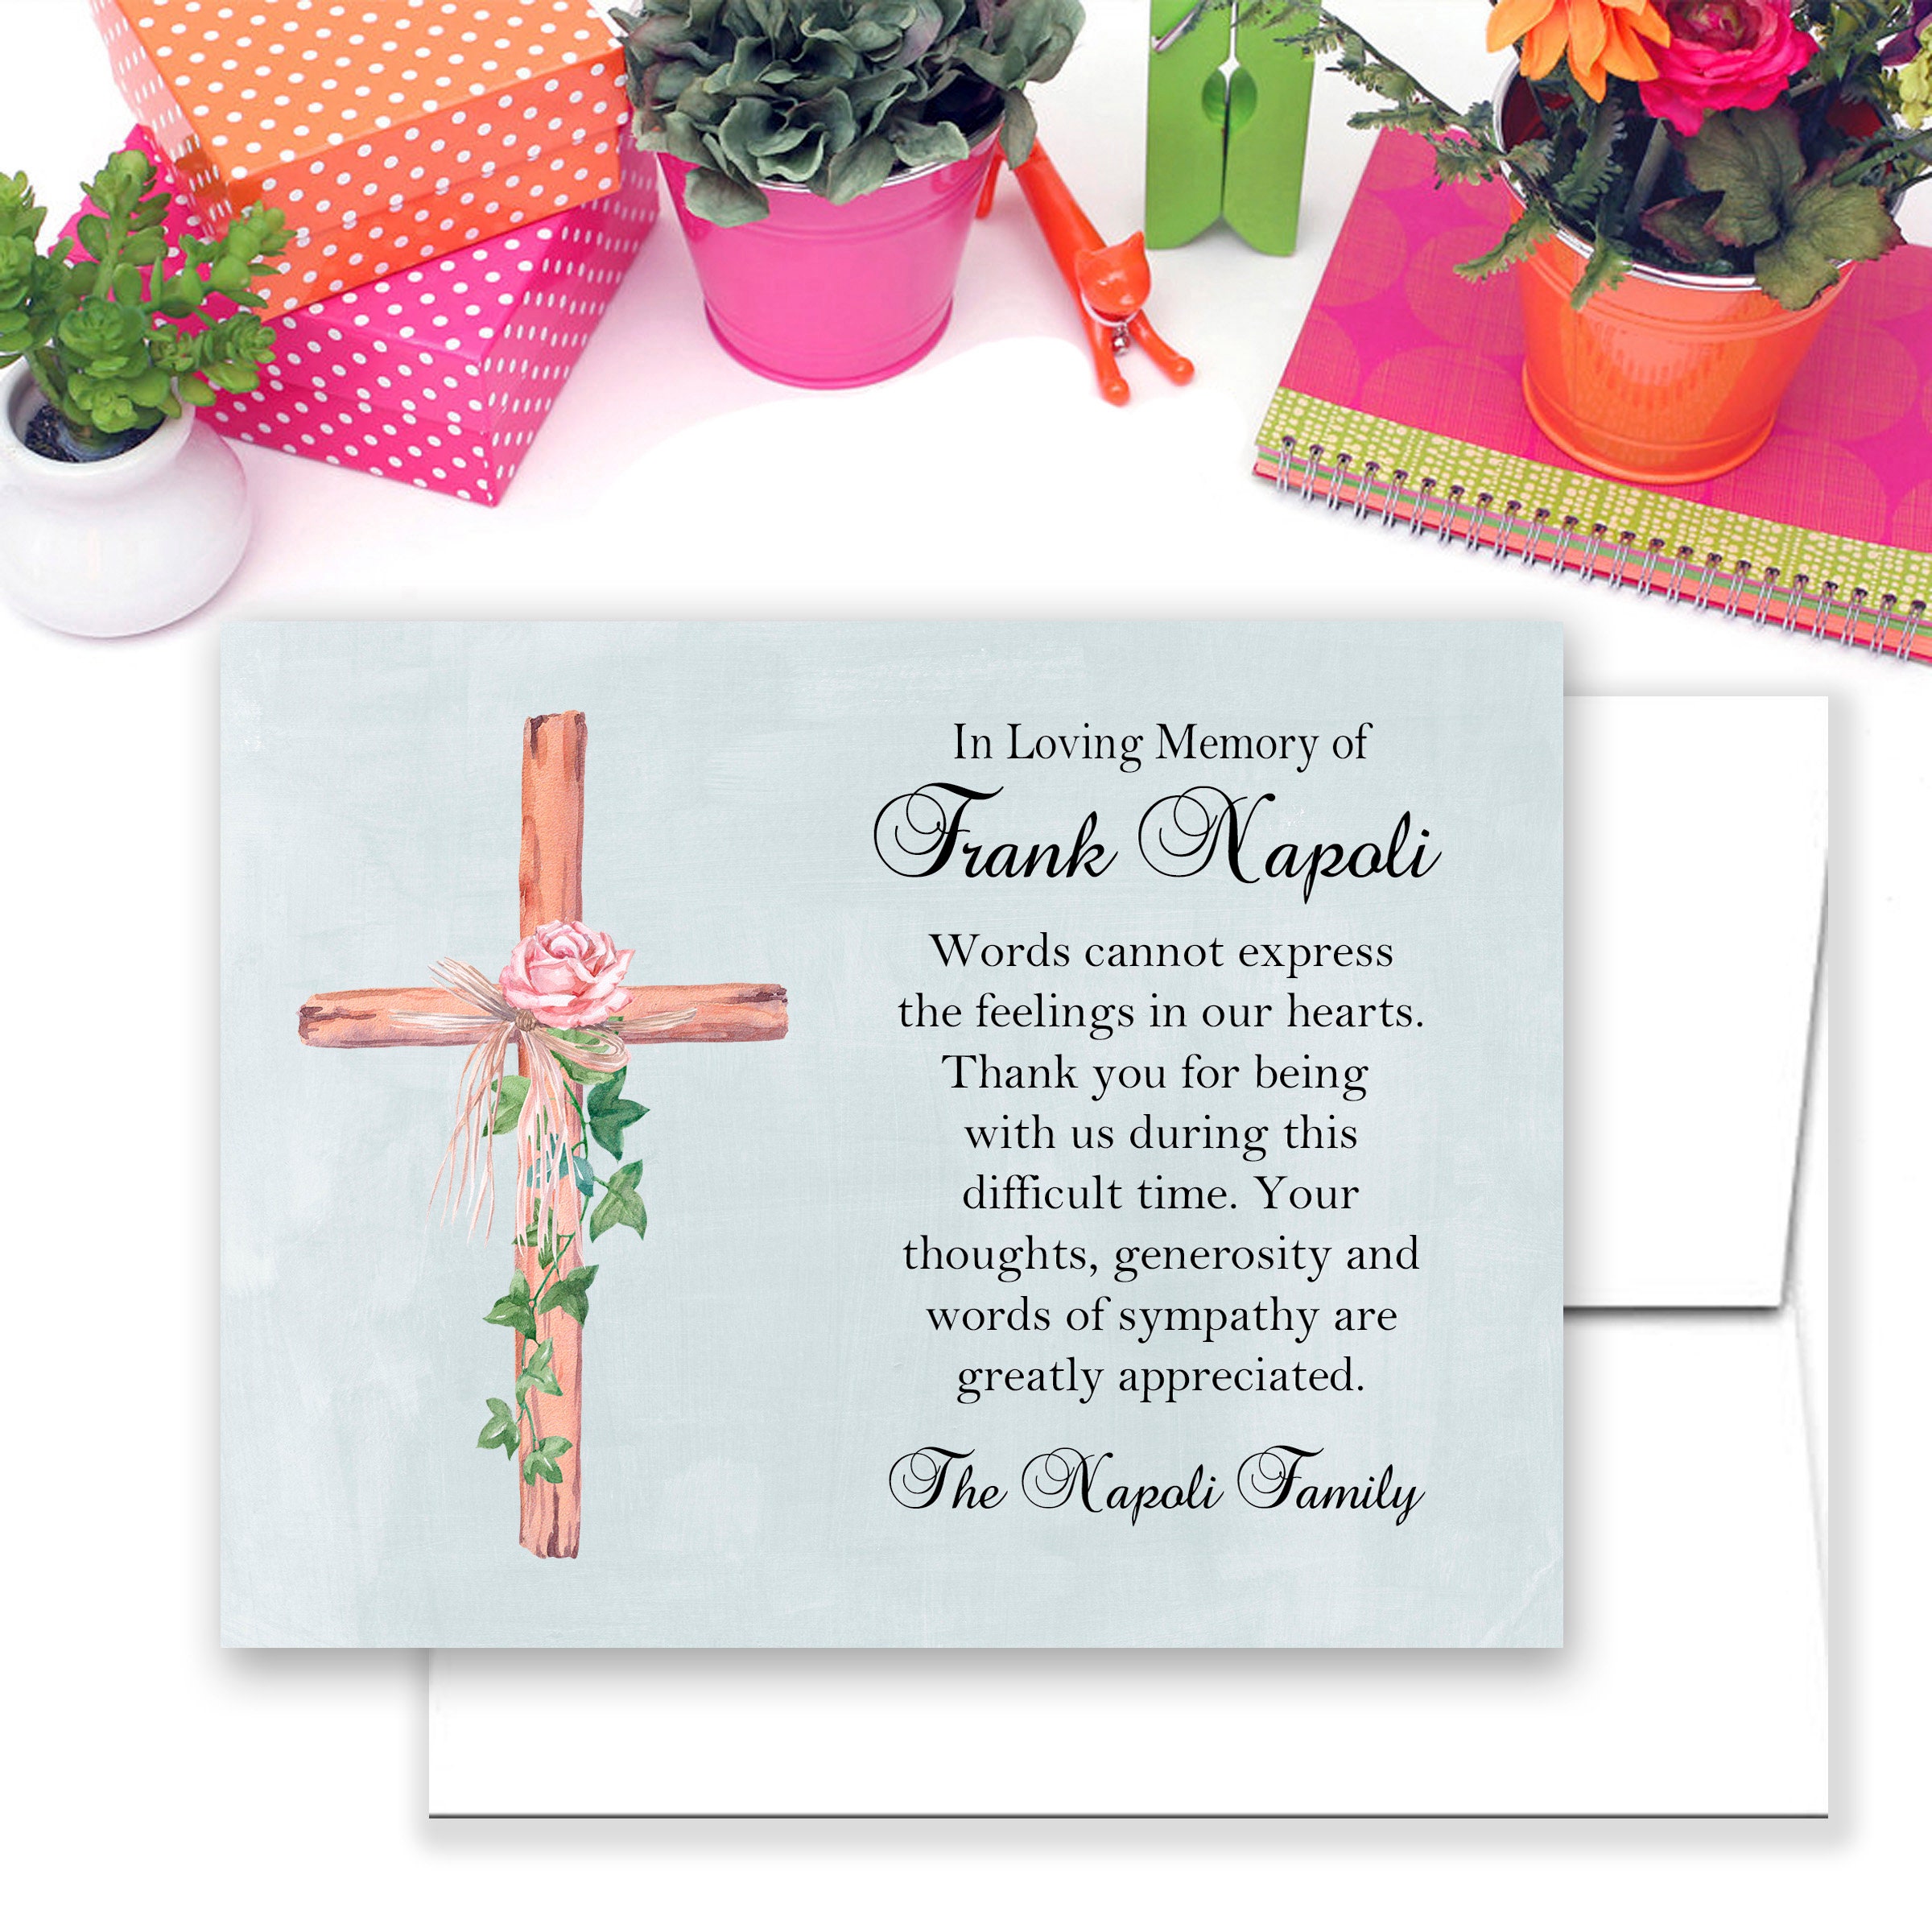 Thank You Notes After Funeral | tunersread.com